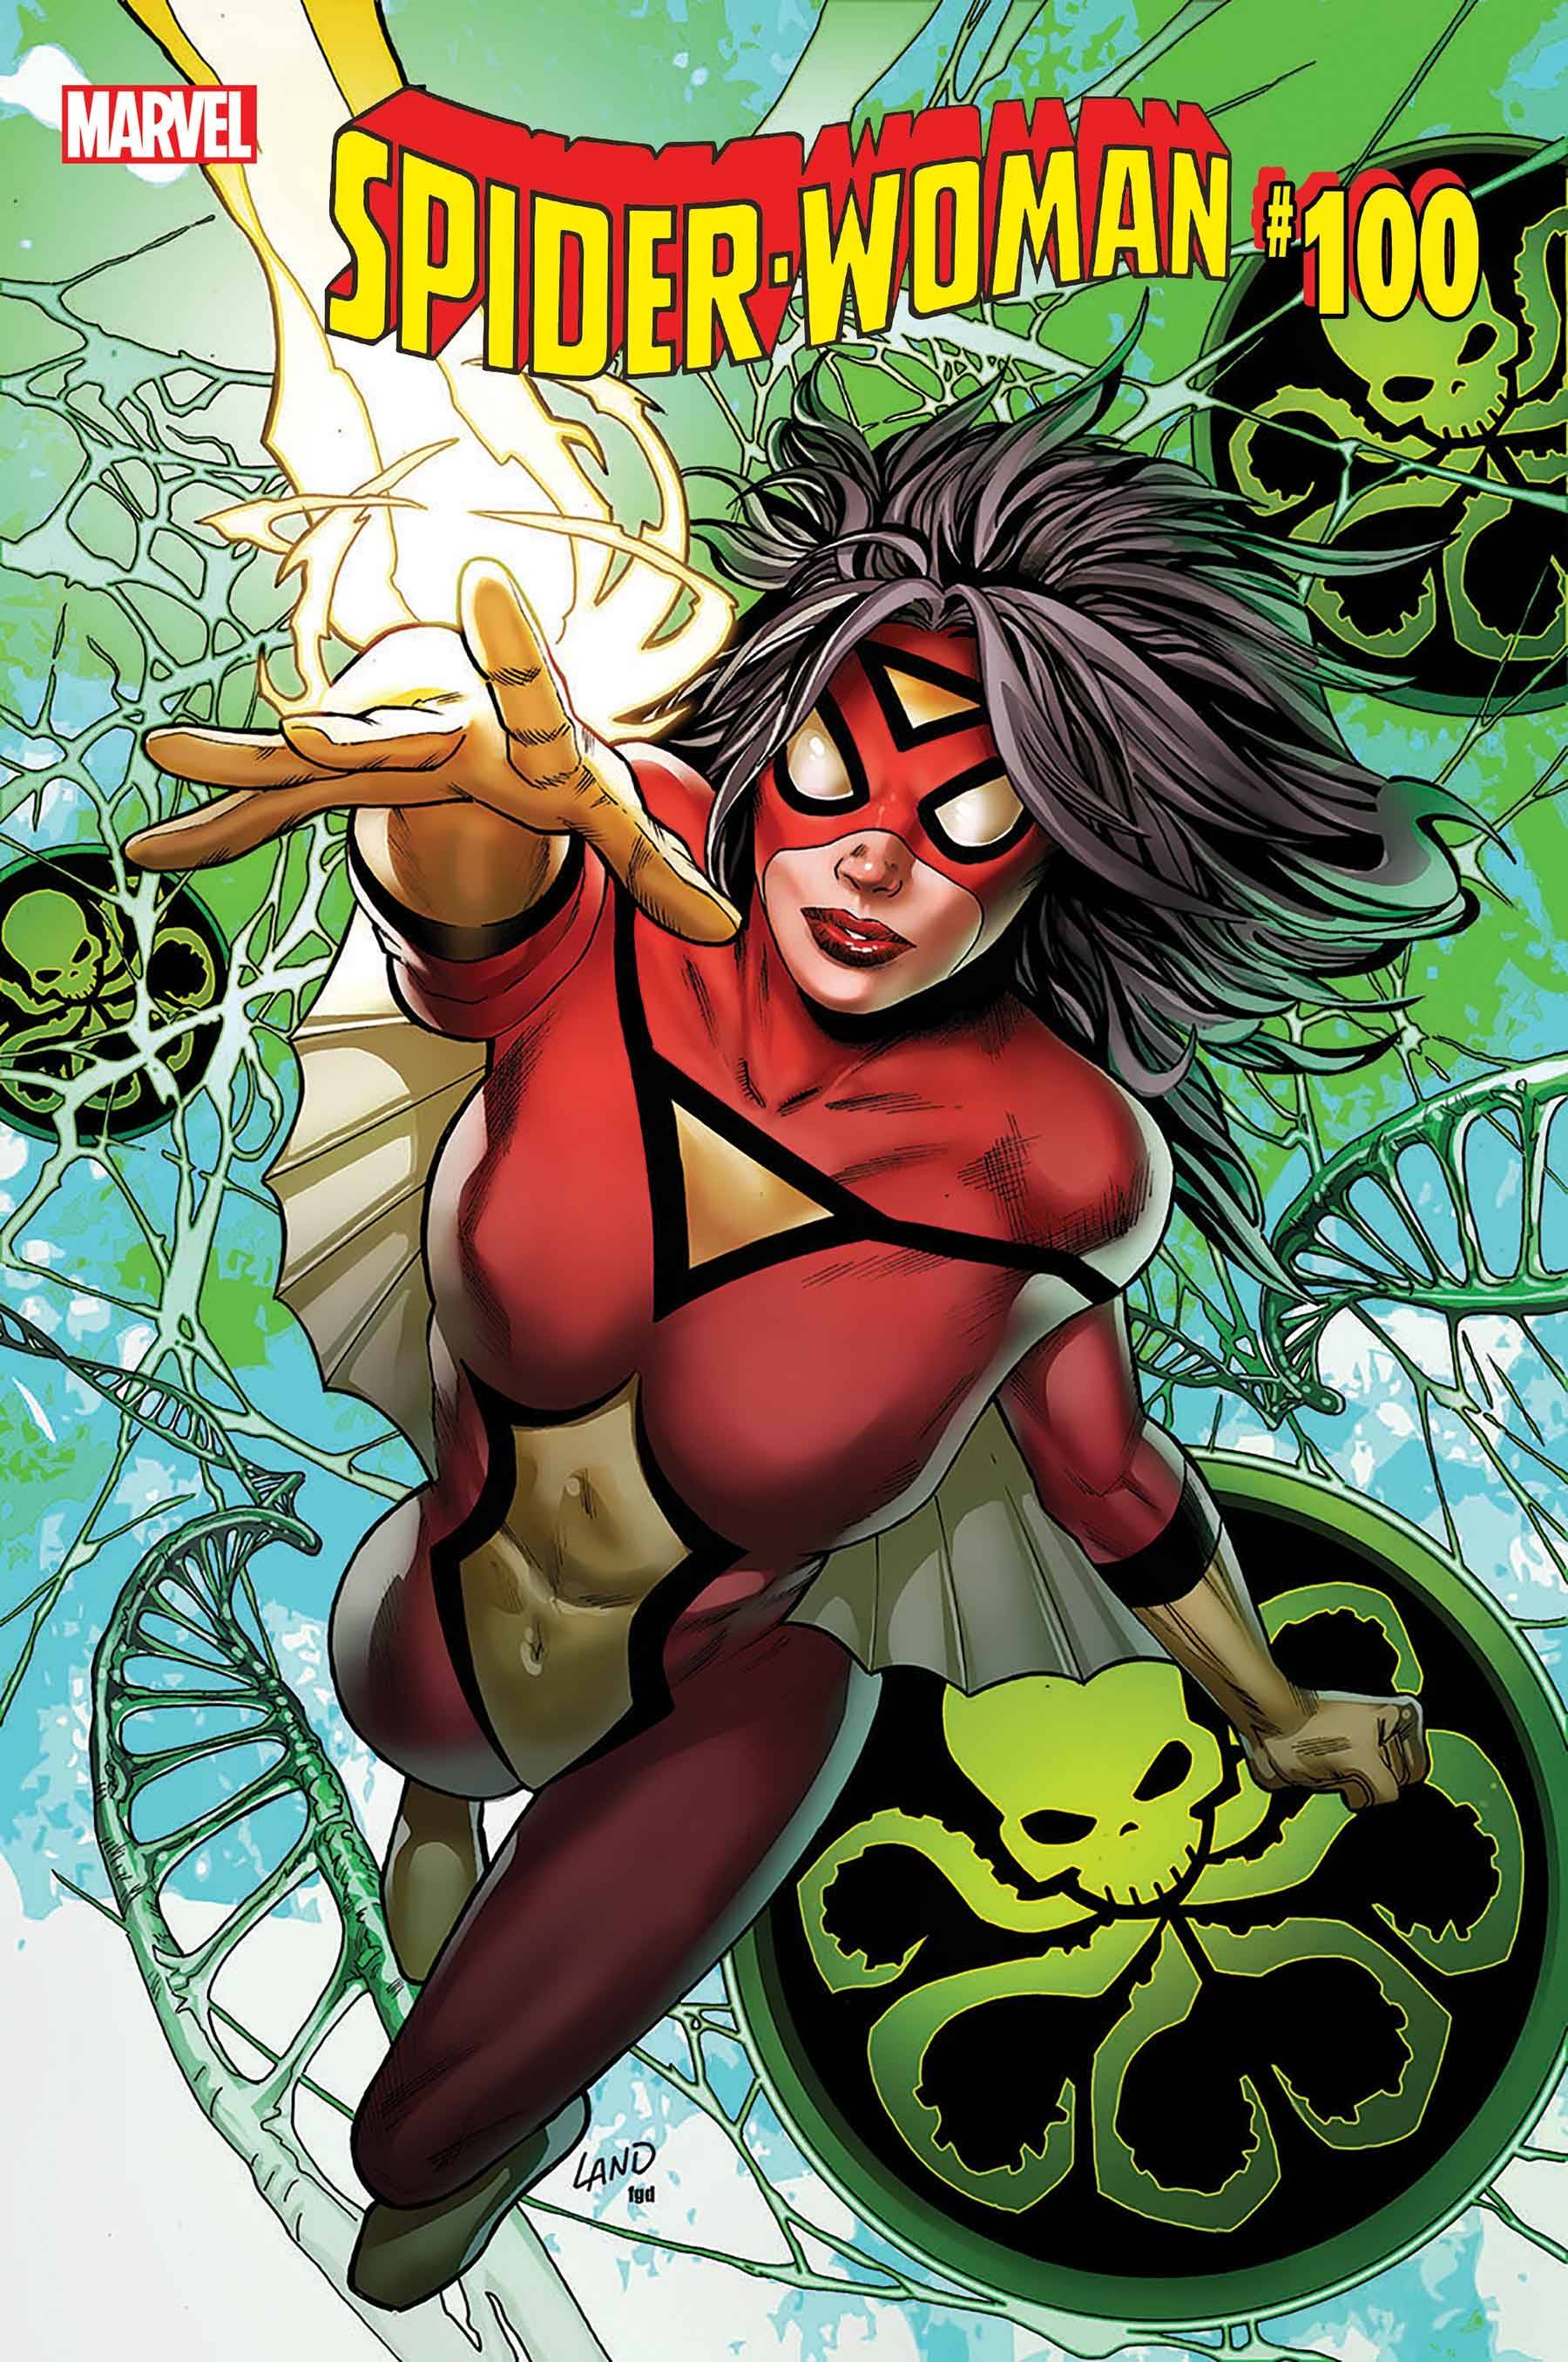 Spider-Woman #100 by Greg Land Poster